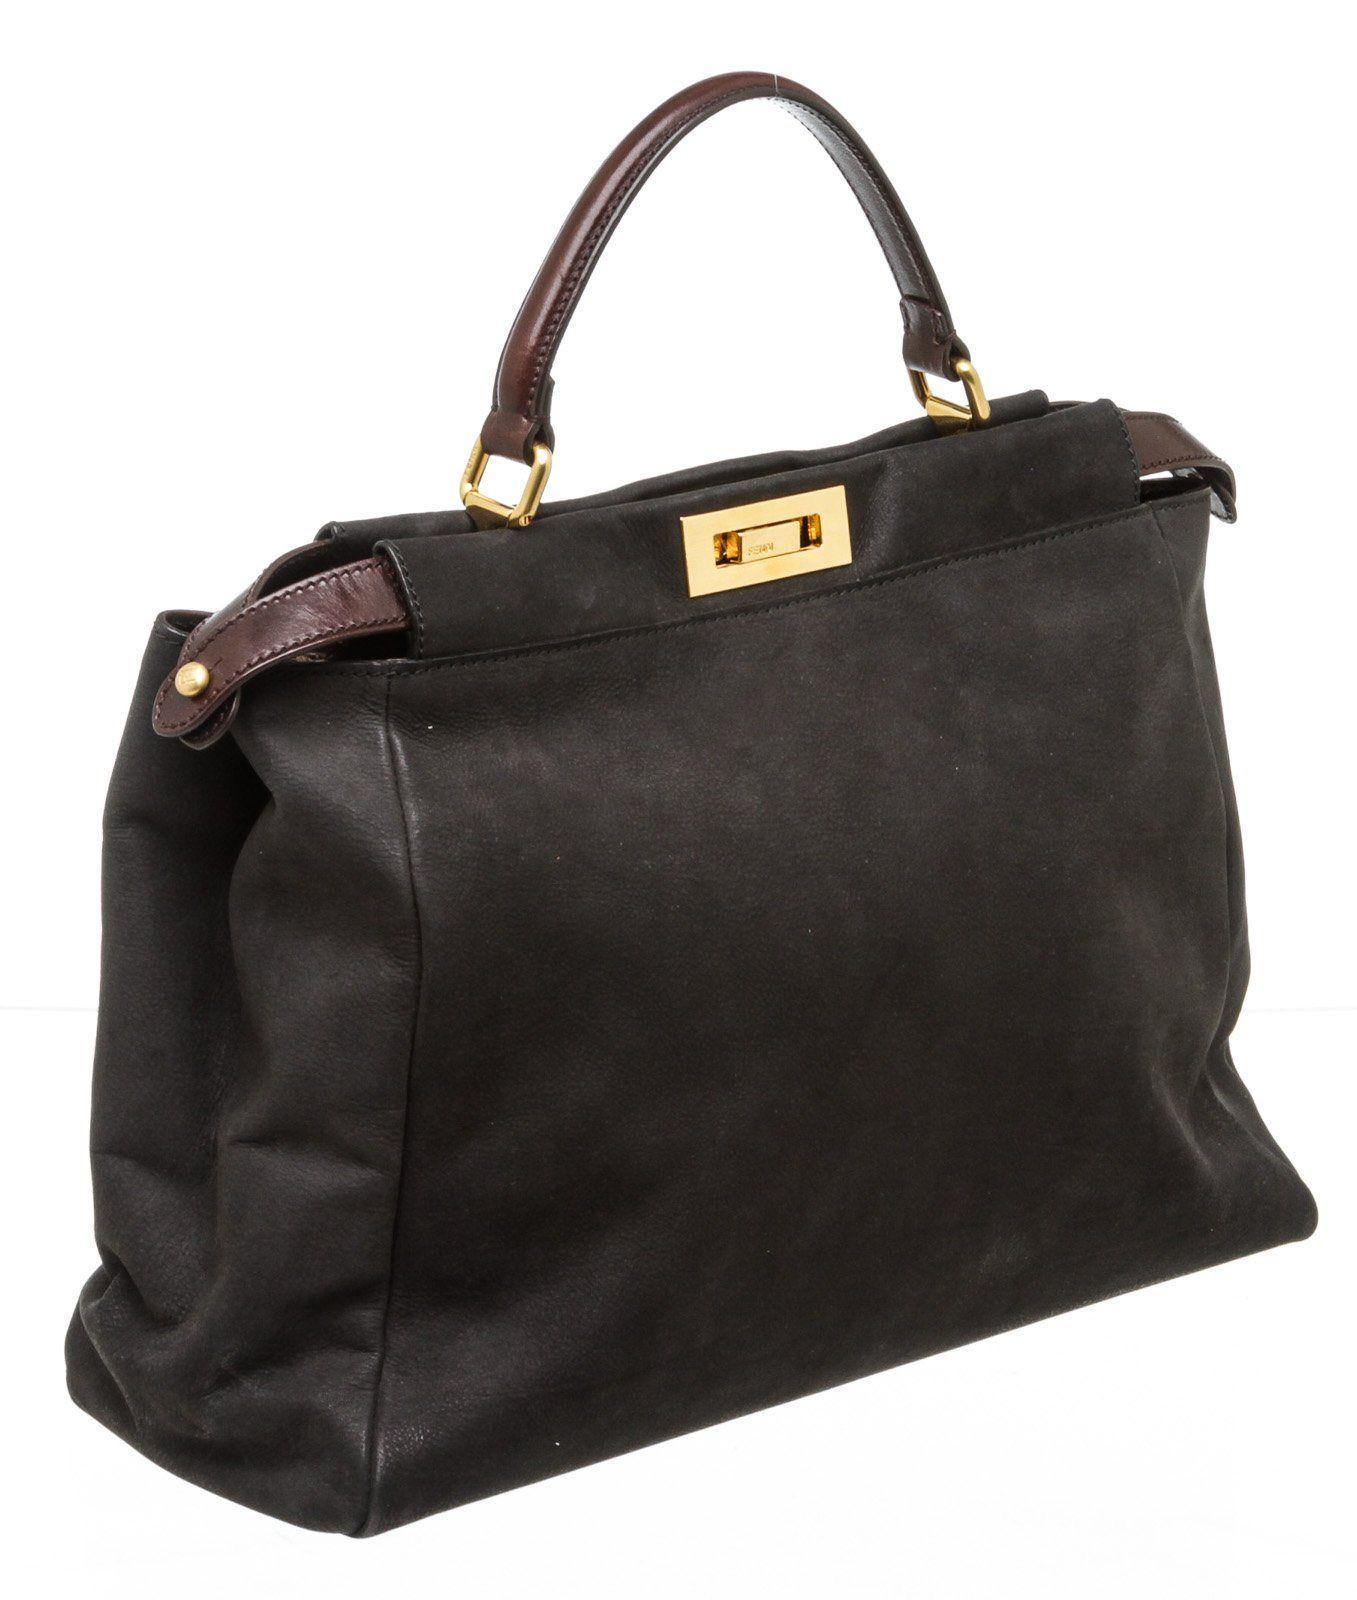 Fendi black nubuck Large Peekaboo satchel with gold-tone hardware, dual interior compartments with logo turn-lock closure, interior pocket with zip top, brown leather top handle.

16135MSC MKR